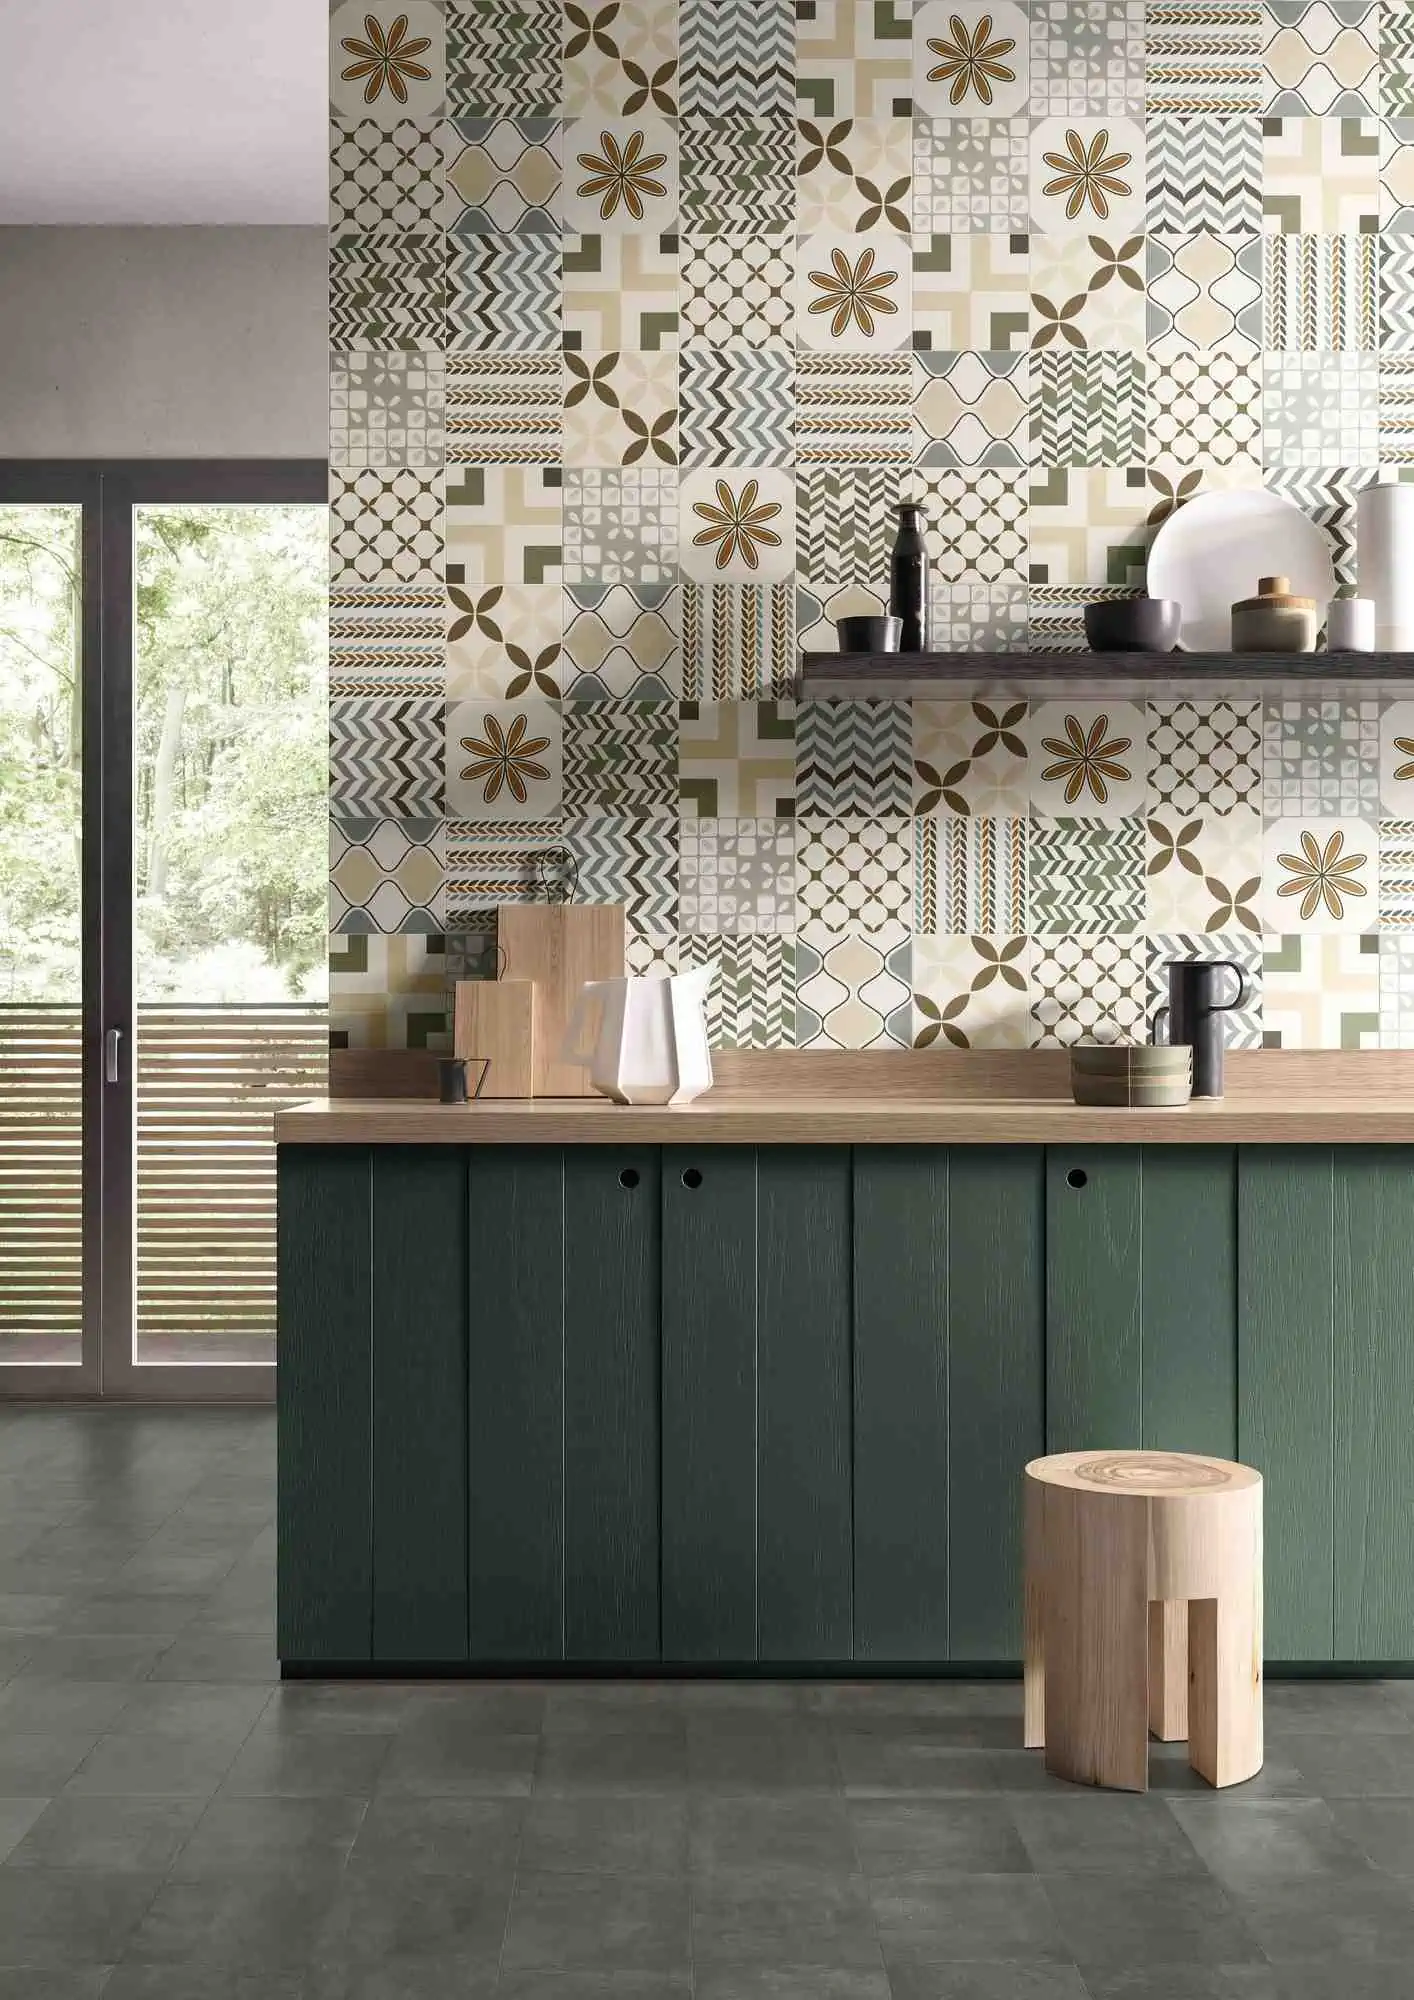 patterned kitchen tiles with green cabinets and floating shelves